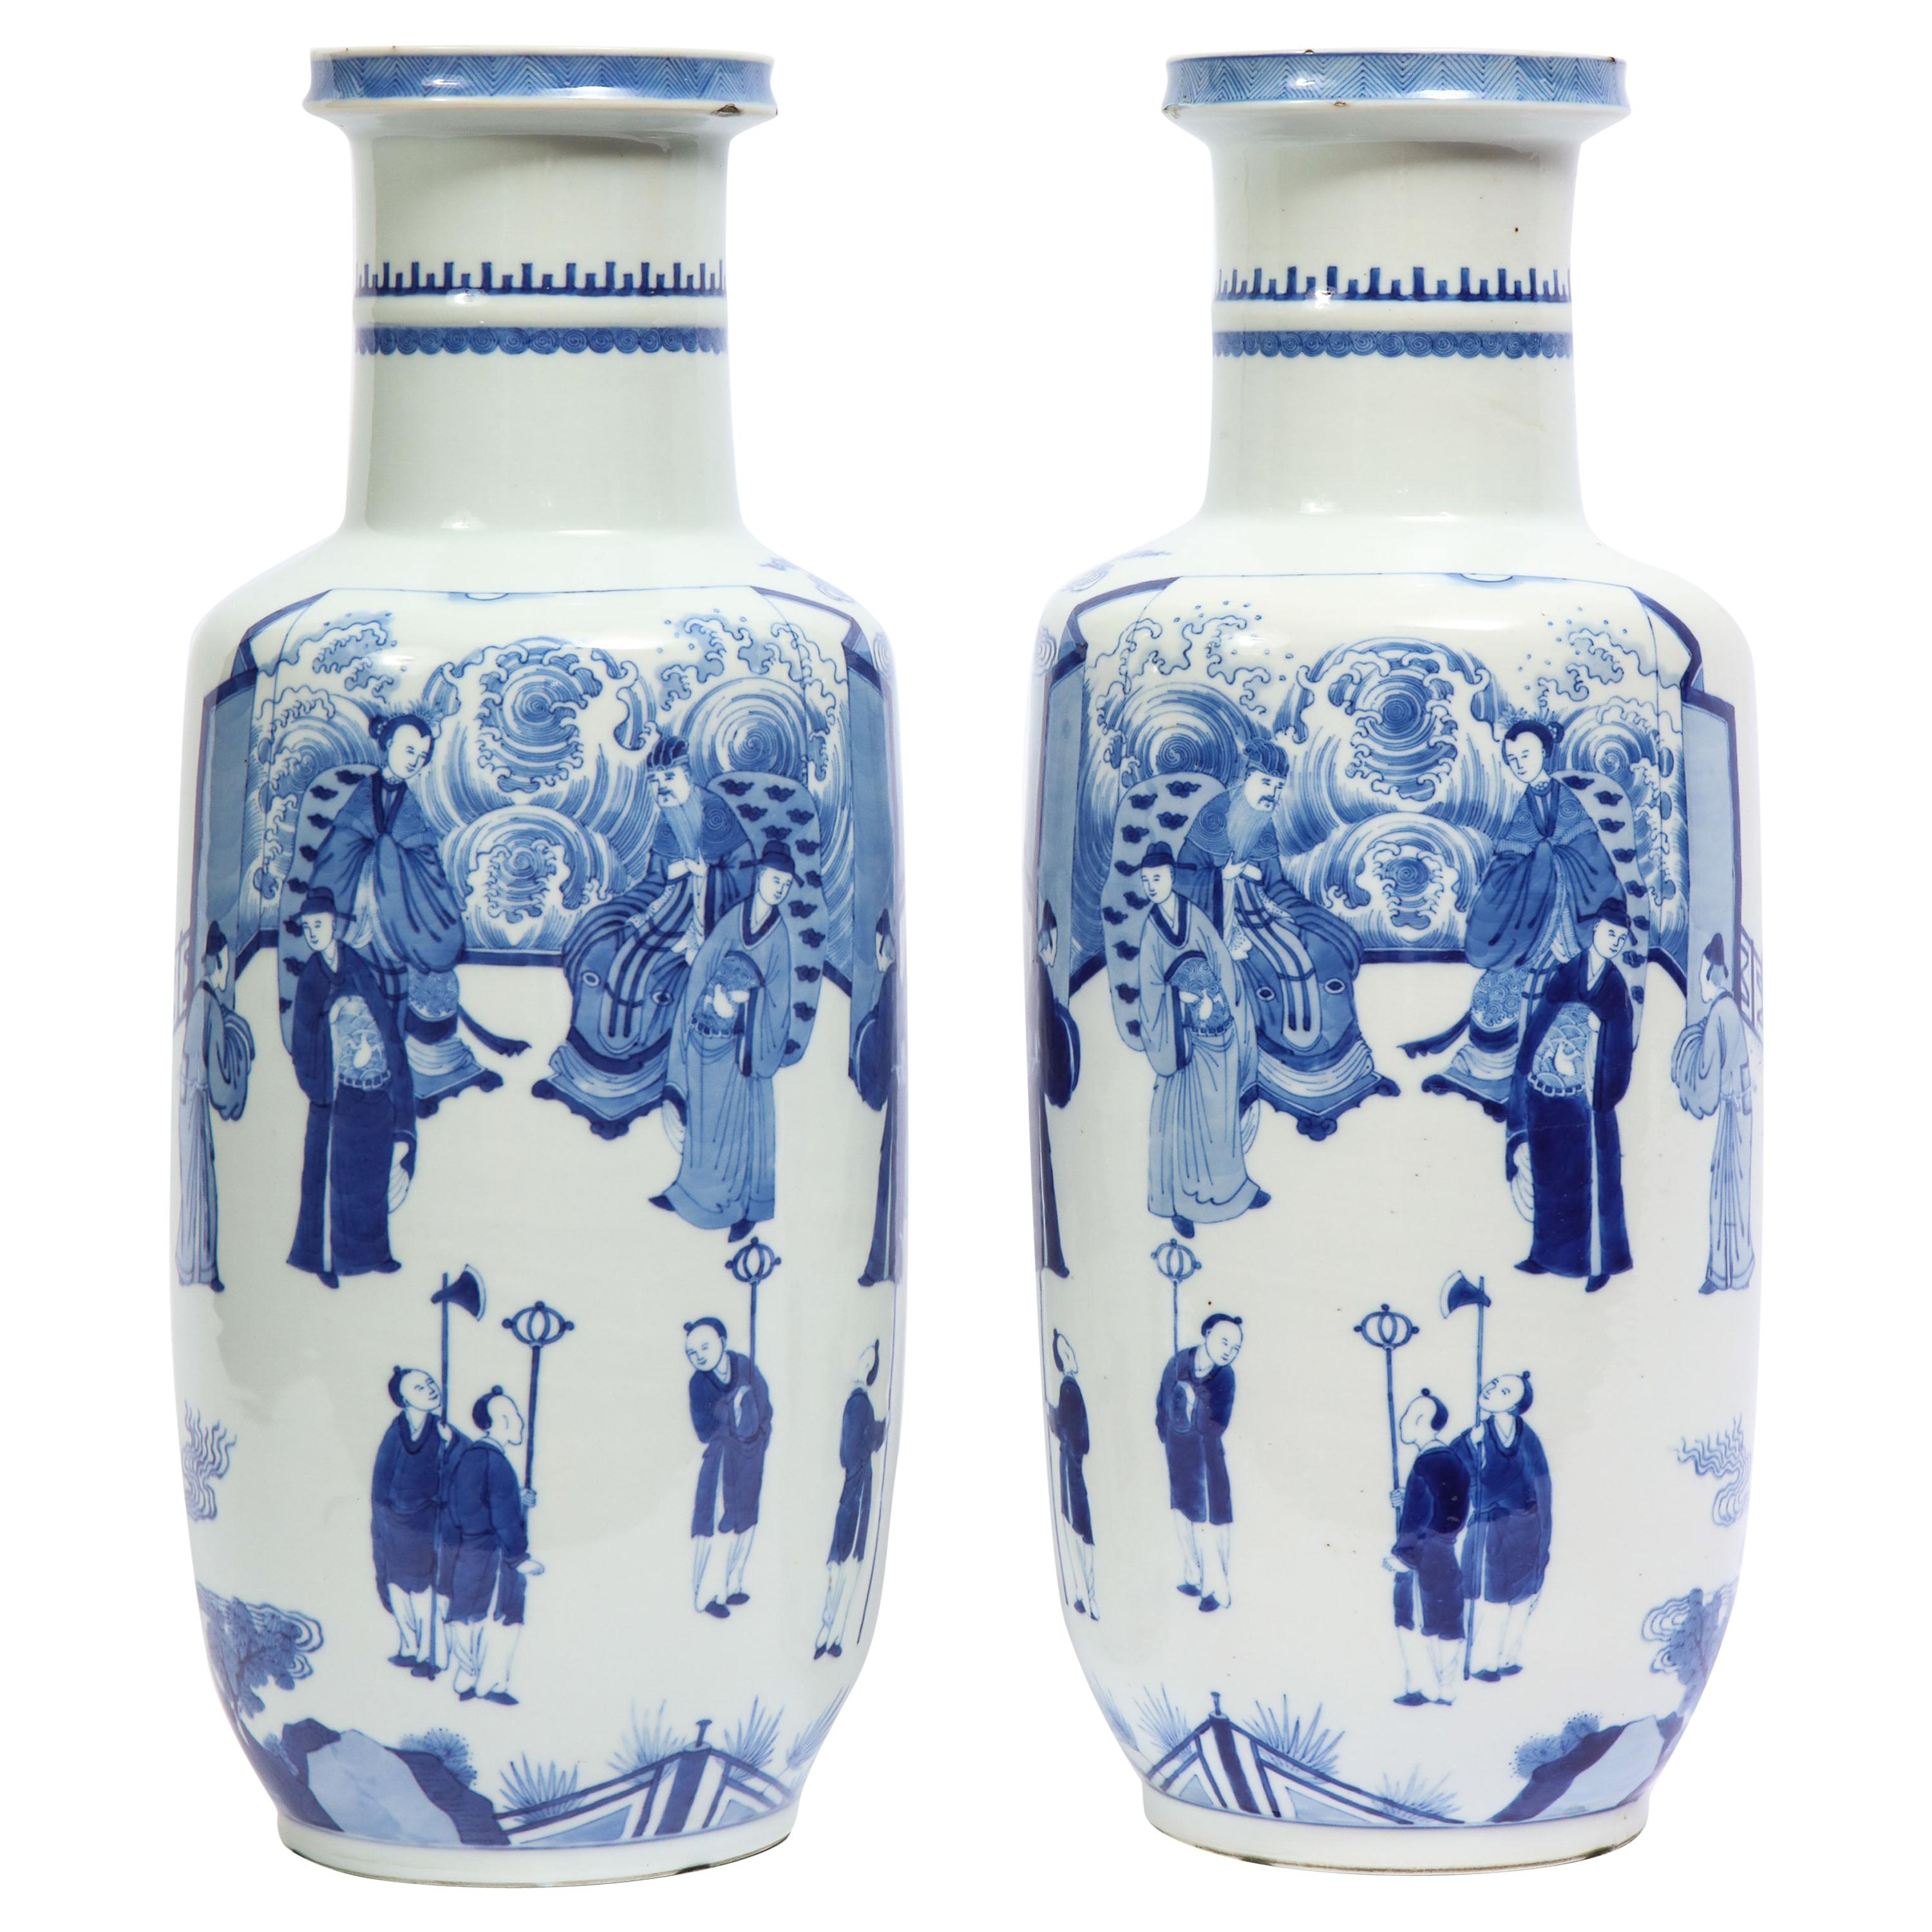 19th Century Blue & White Chinese Porcelain Bangchui Ping Form Vases, Pair For Sale